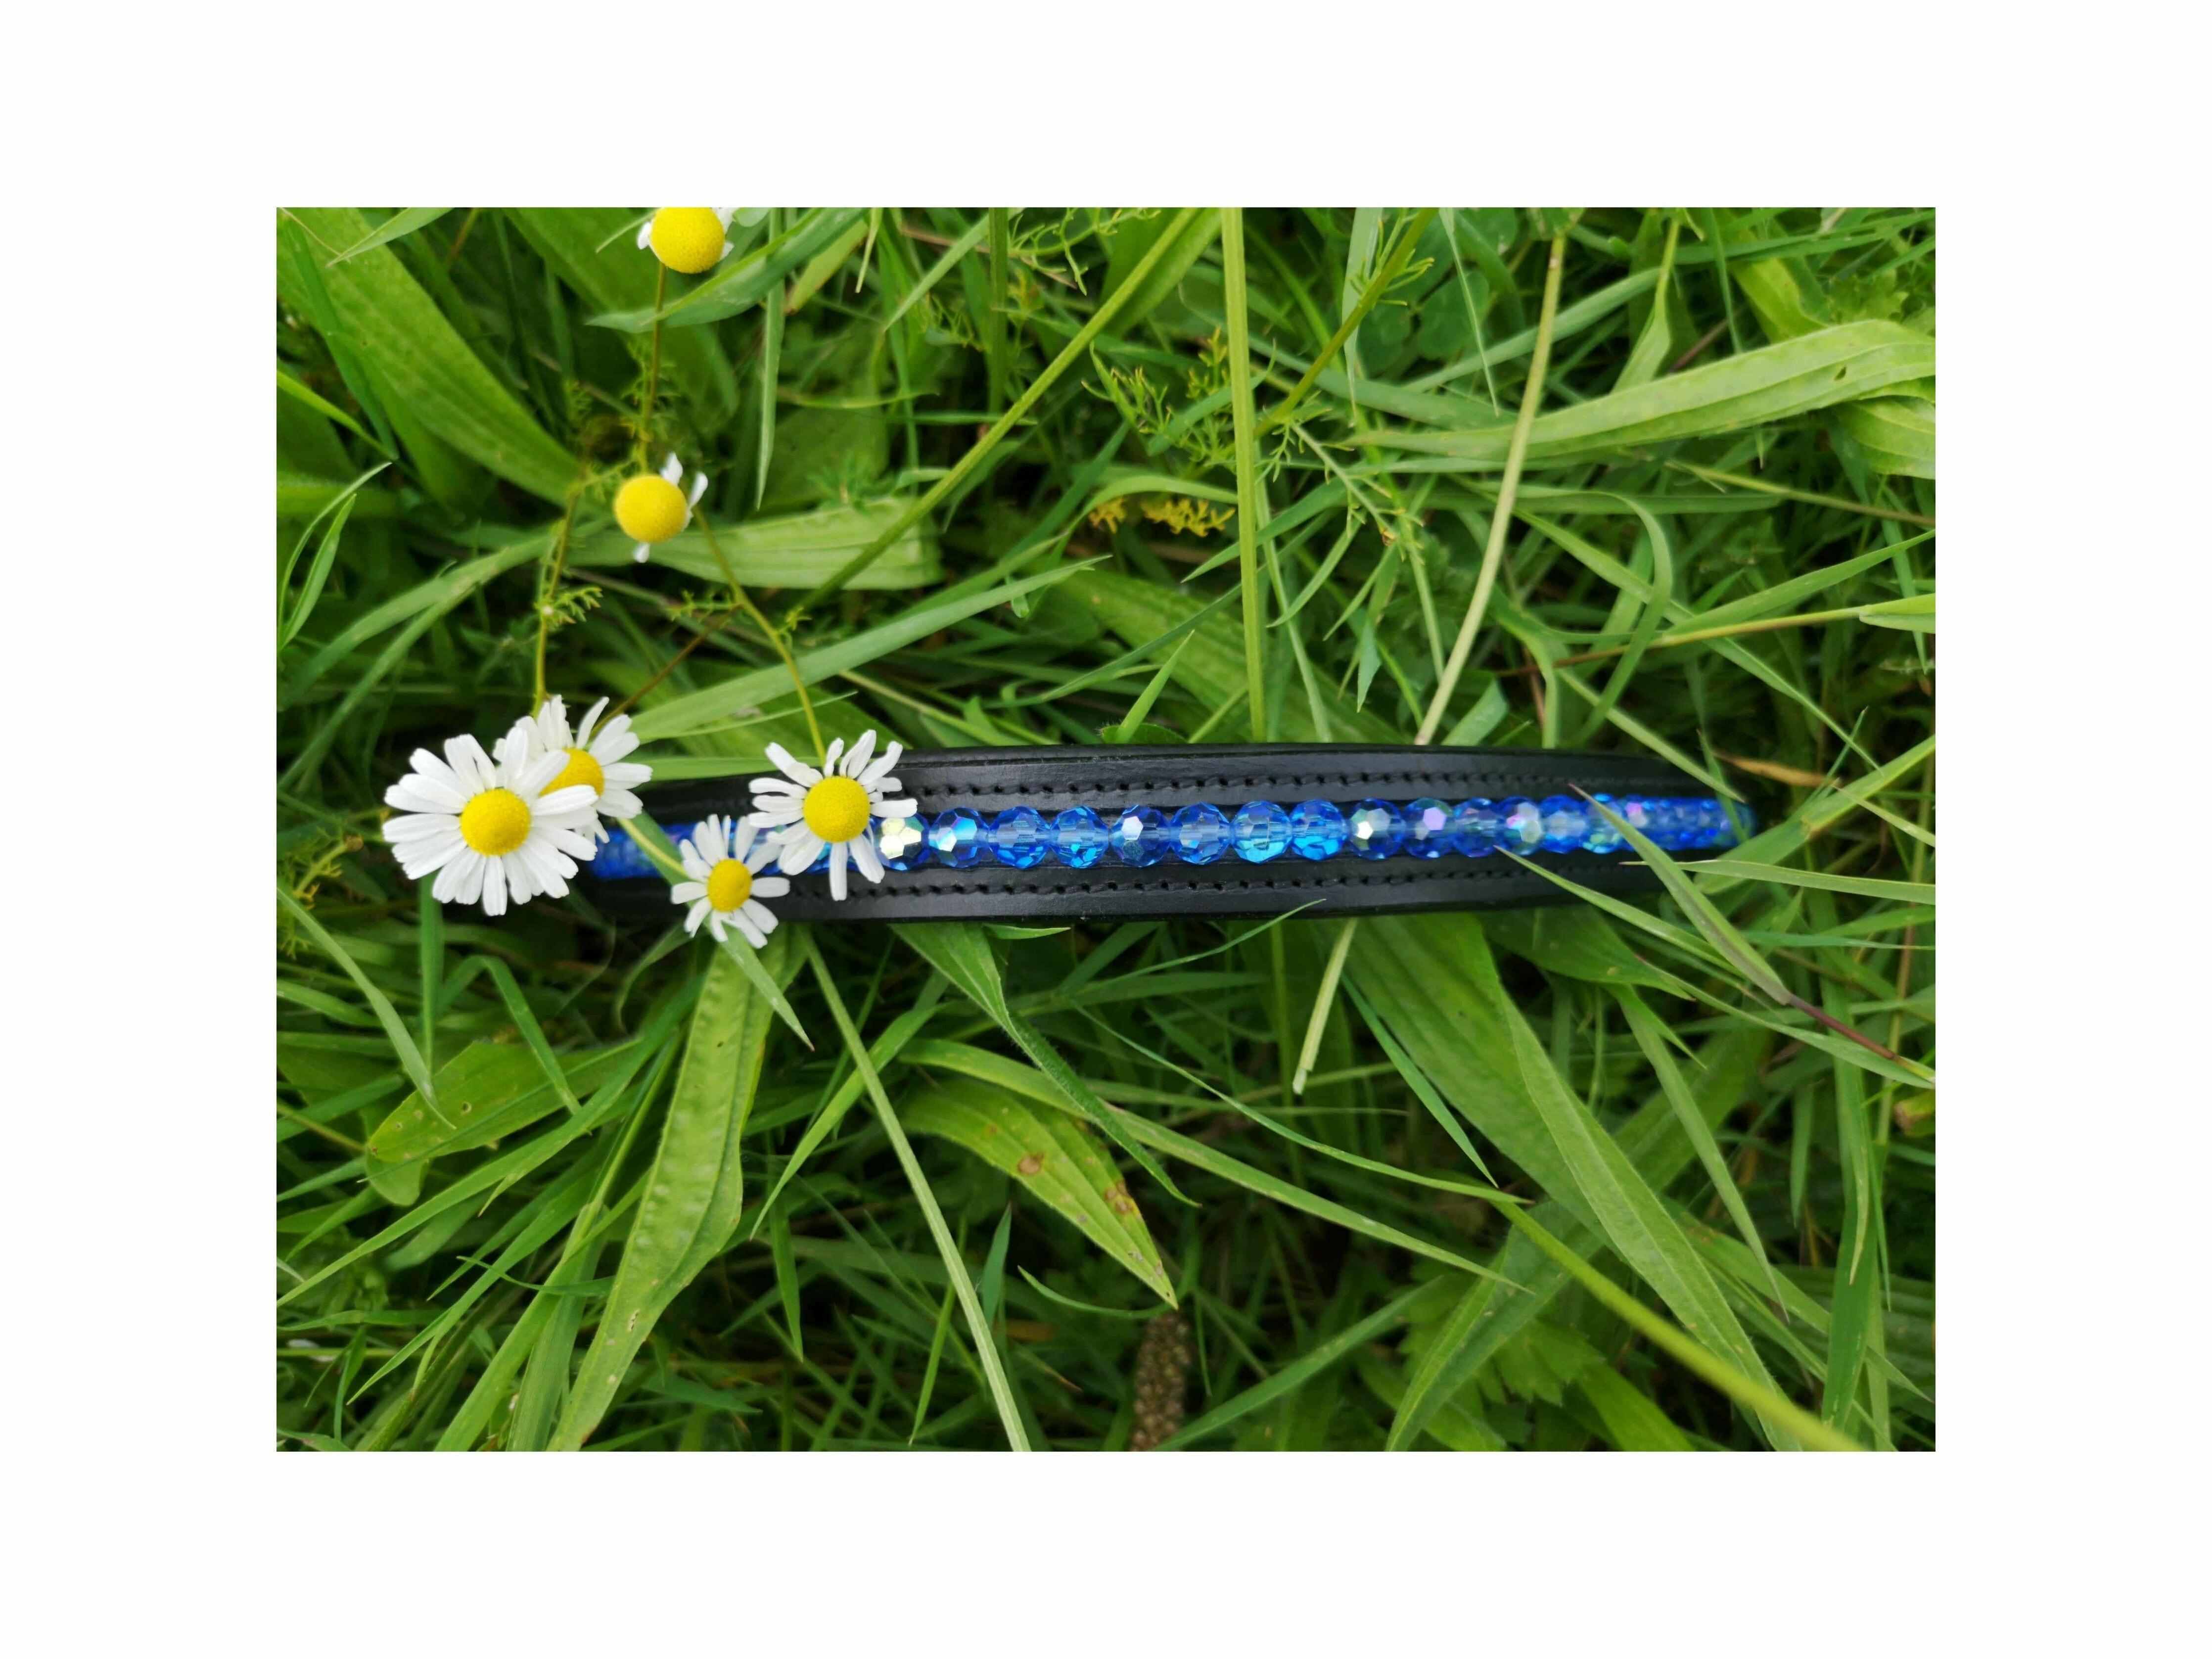 Browband with hand stitched blue faceted glass beads laying on long grass